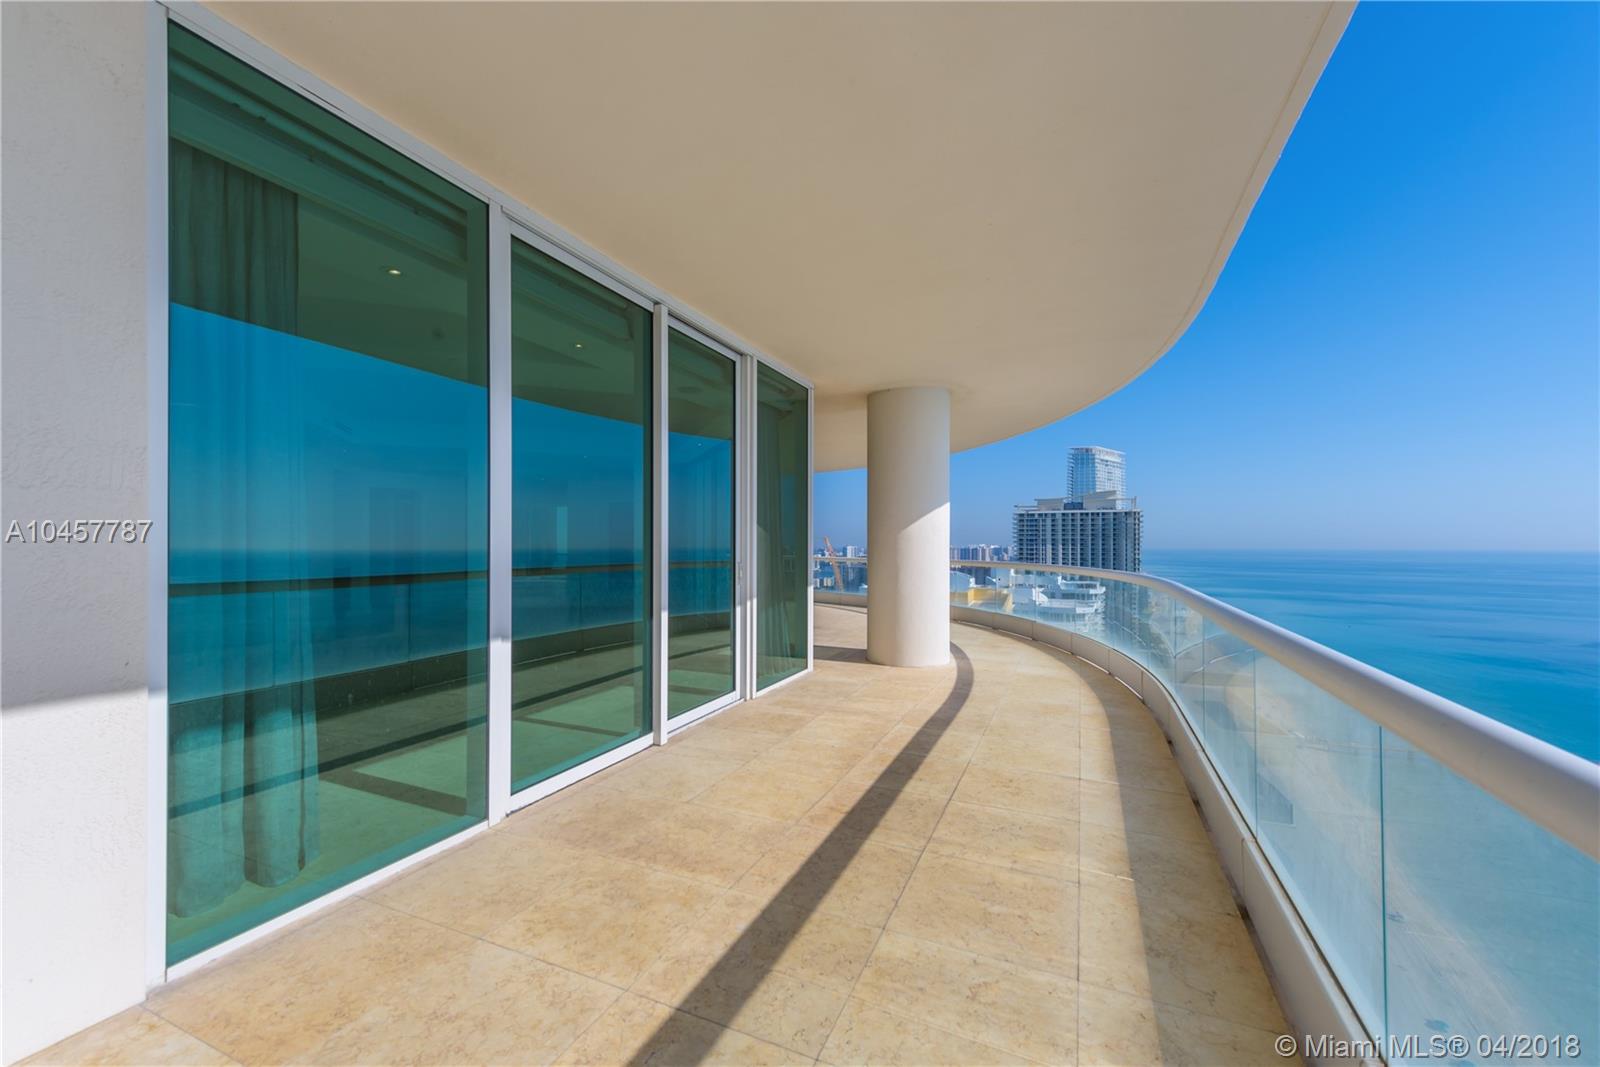 Turnberry Ocean Colony North Miami Condos For Sale Worldwide